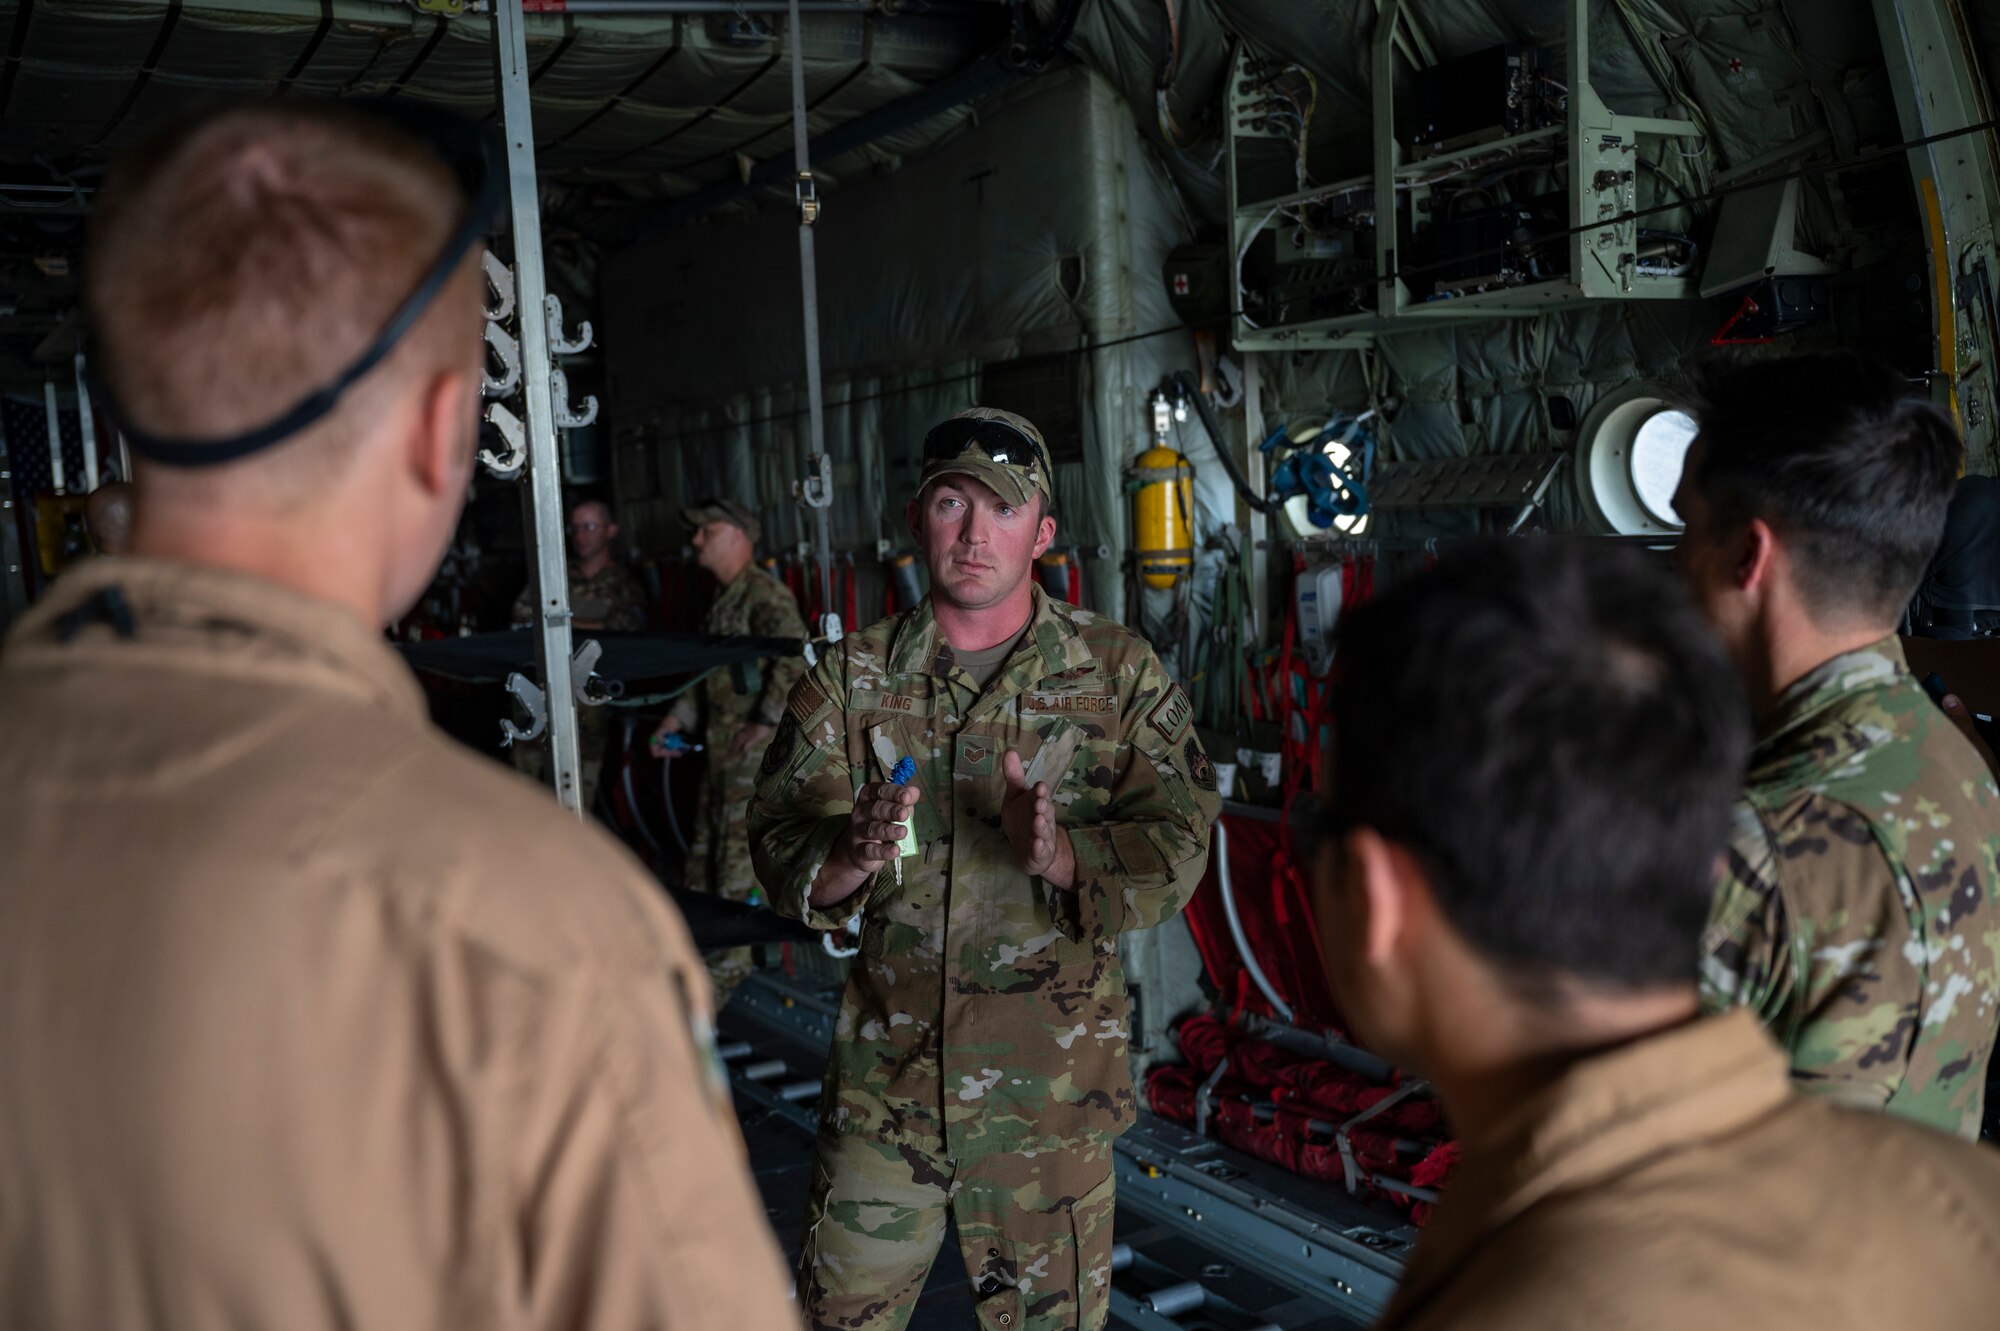 U.S. Air Force Staff Sgt. Brandon King, a loadmaster assigned to the 779th Expeditionary Airlift Squadron, interacts with visitors during a C-130H Hercules tour at Ali Al Salem Air Base, Kuwait, Oct. 9, 2021.